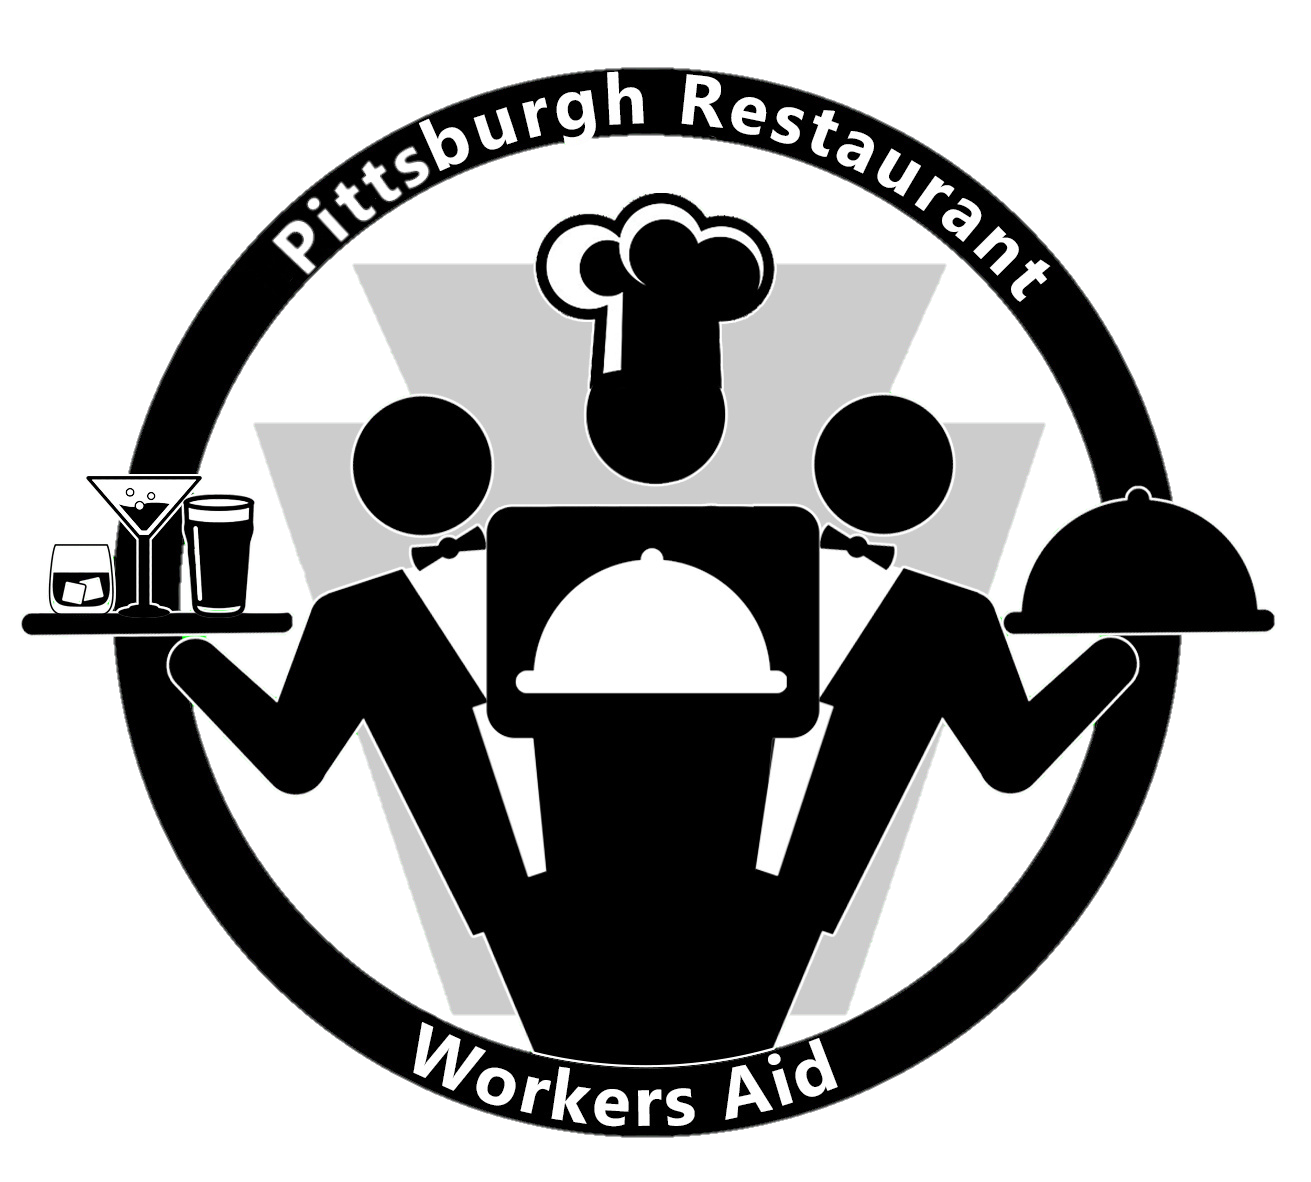 Pittsburgh Restaurant Workers Aid